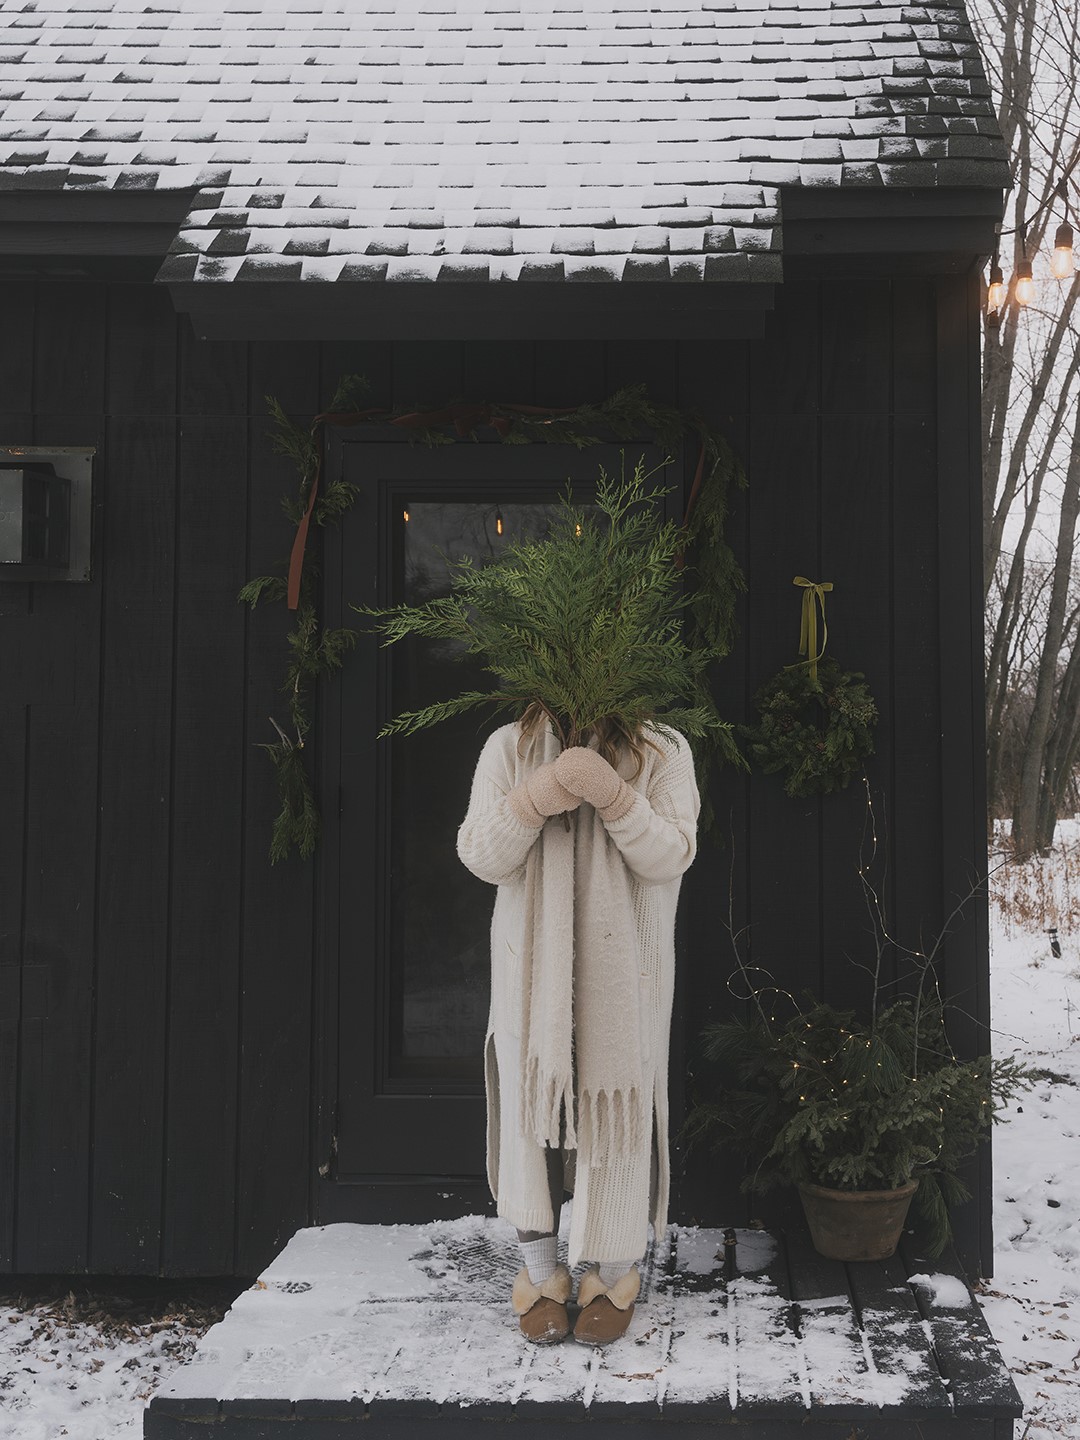 The retreat offers a whimsical escape from what Wilder calls the “rat race” of modern life. Photo: Moonshot Photography